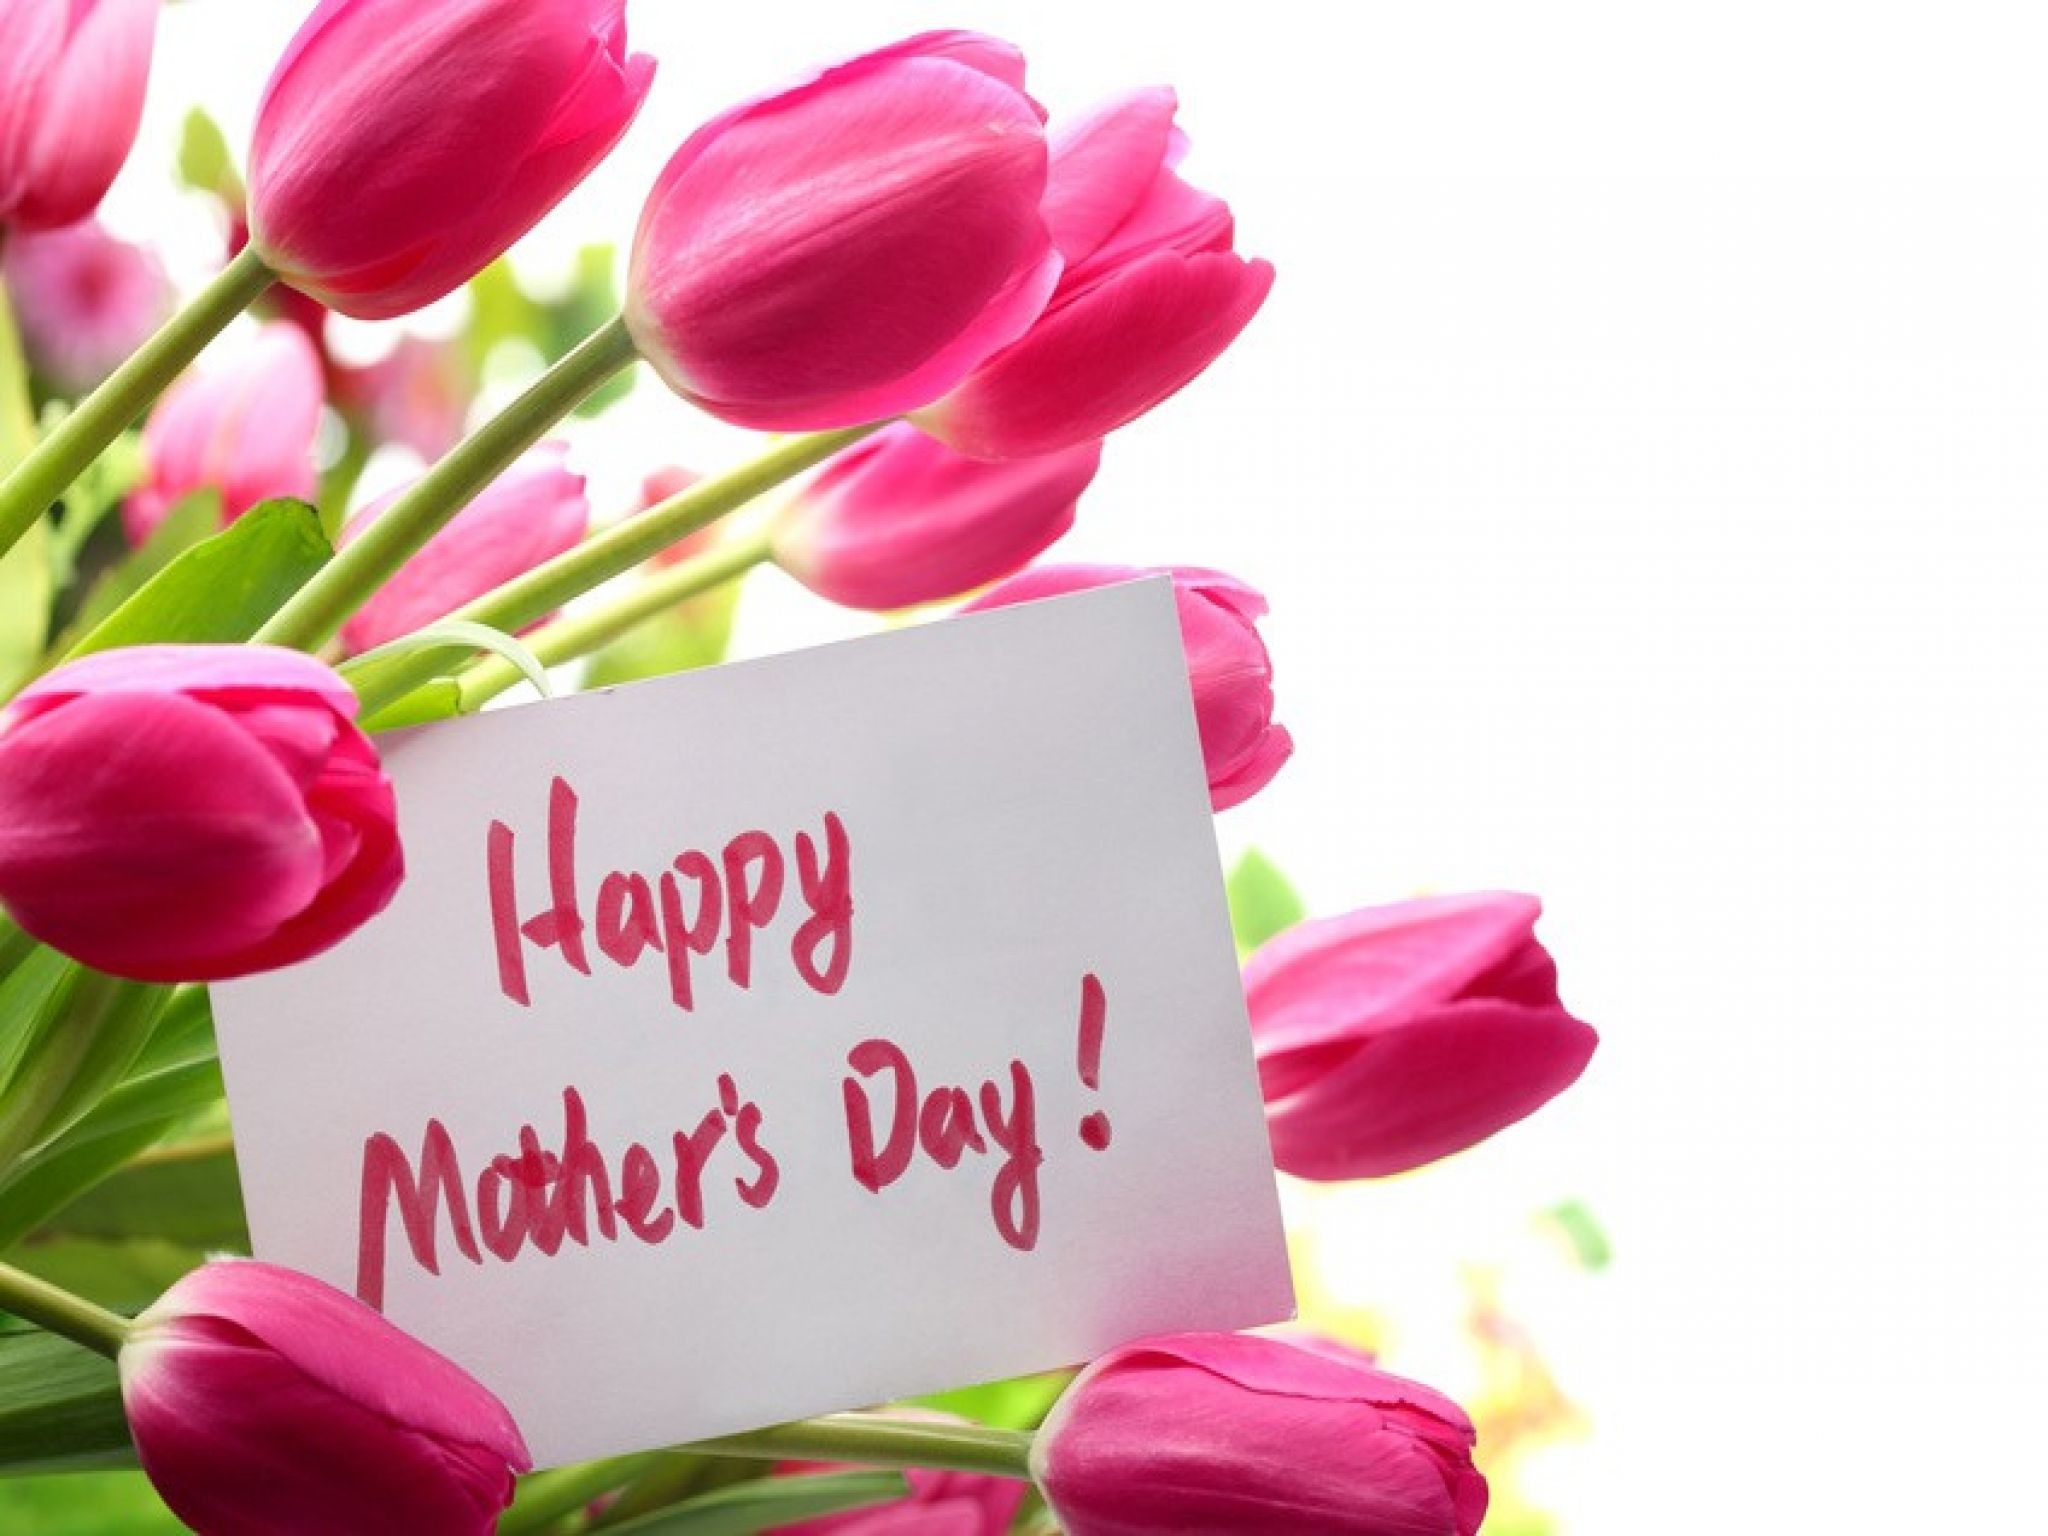 Happy Mother's Day Images, Free Download HD Wallpaper, Pictures, Photos Of  Happy Mother's Day - Mixing Images